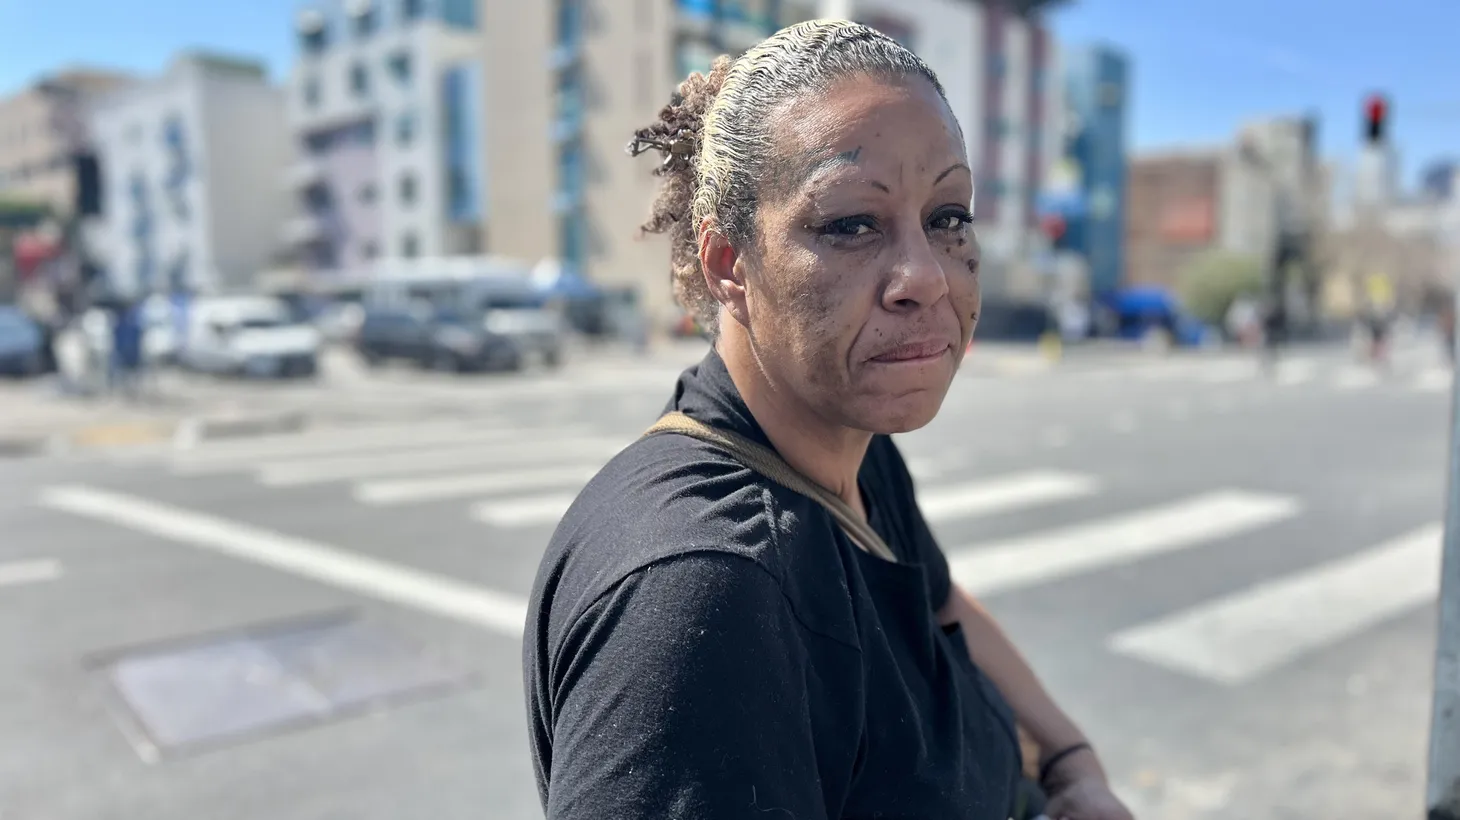 New CARE Courts would require treatment for some mentally ill people. Zenobia, who wouldn’t give her last name and says she lives on the streets and has been diagnosed with psychosis, supports the program.